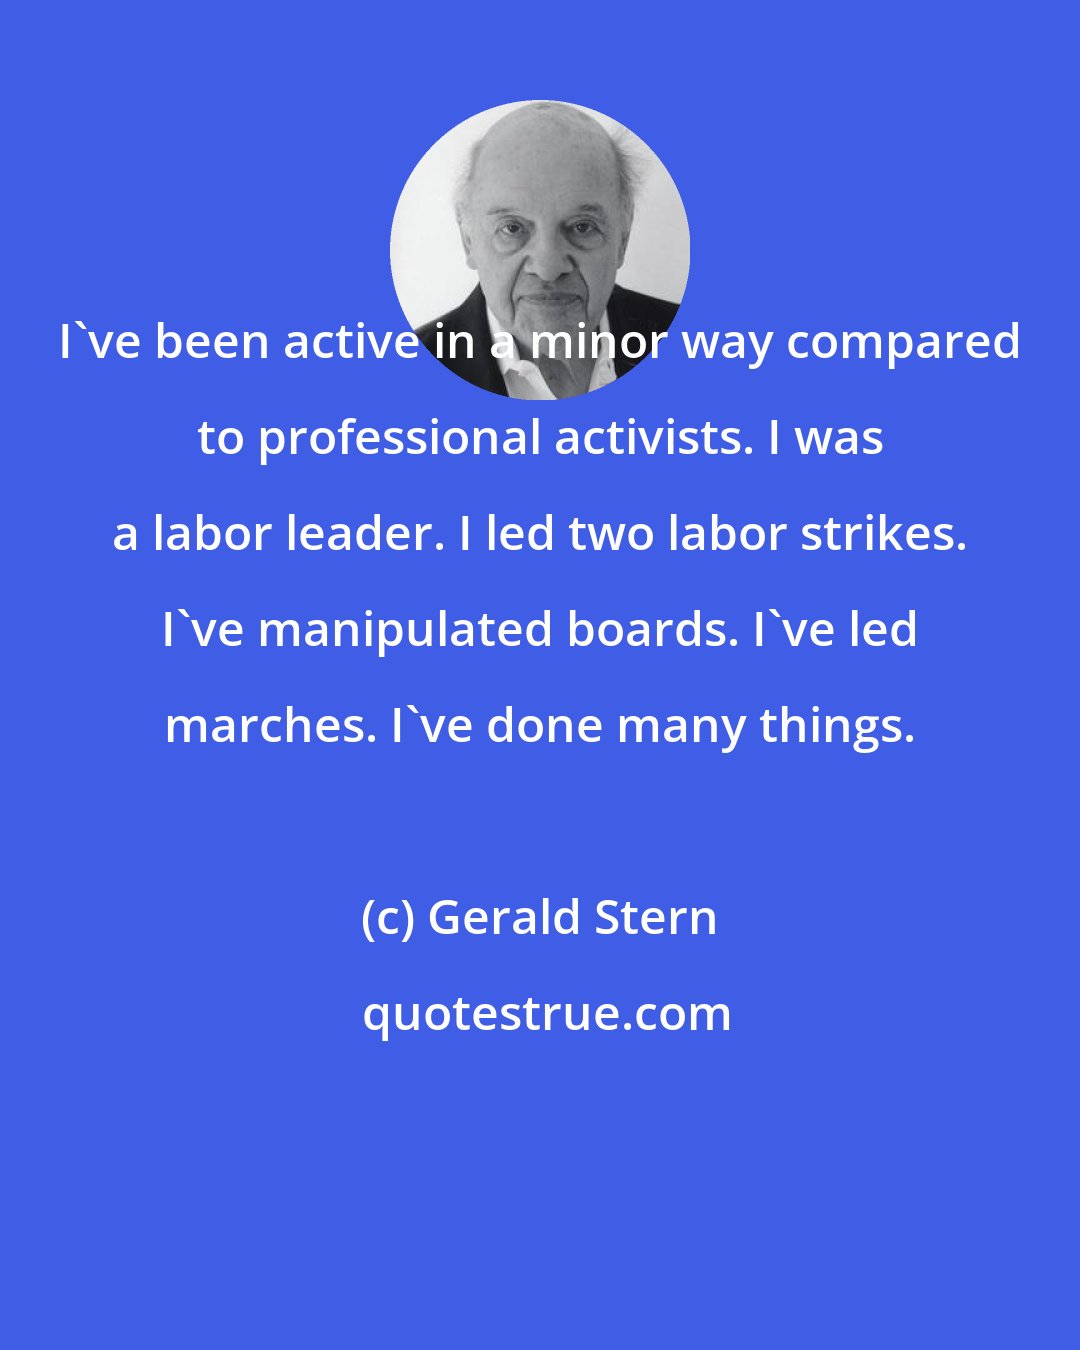 Gerald Stern: I've been active in a minor way compared to professional activists. I was a labor leader. I led two labor strikes. I've manipulated boards. I've led marches. I've done many things.